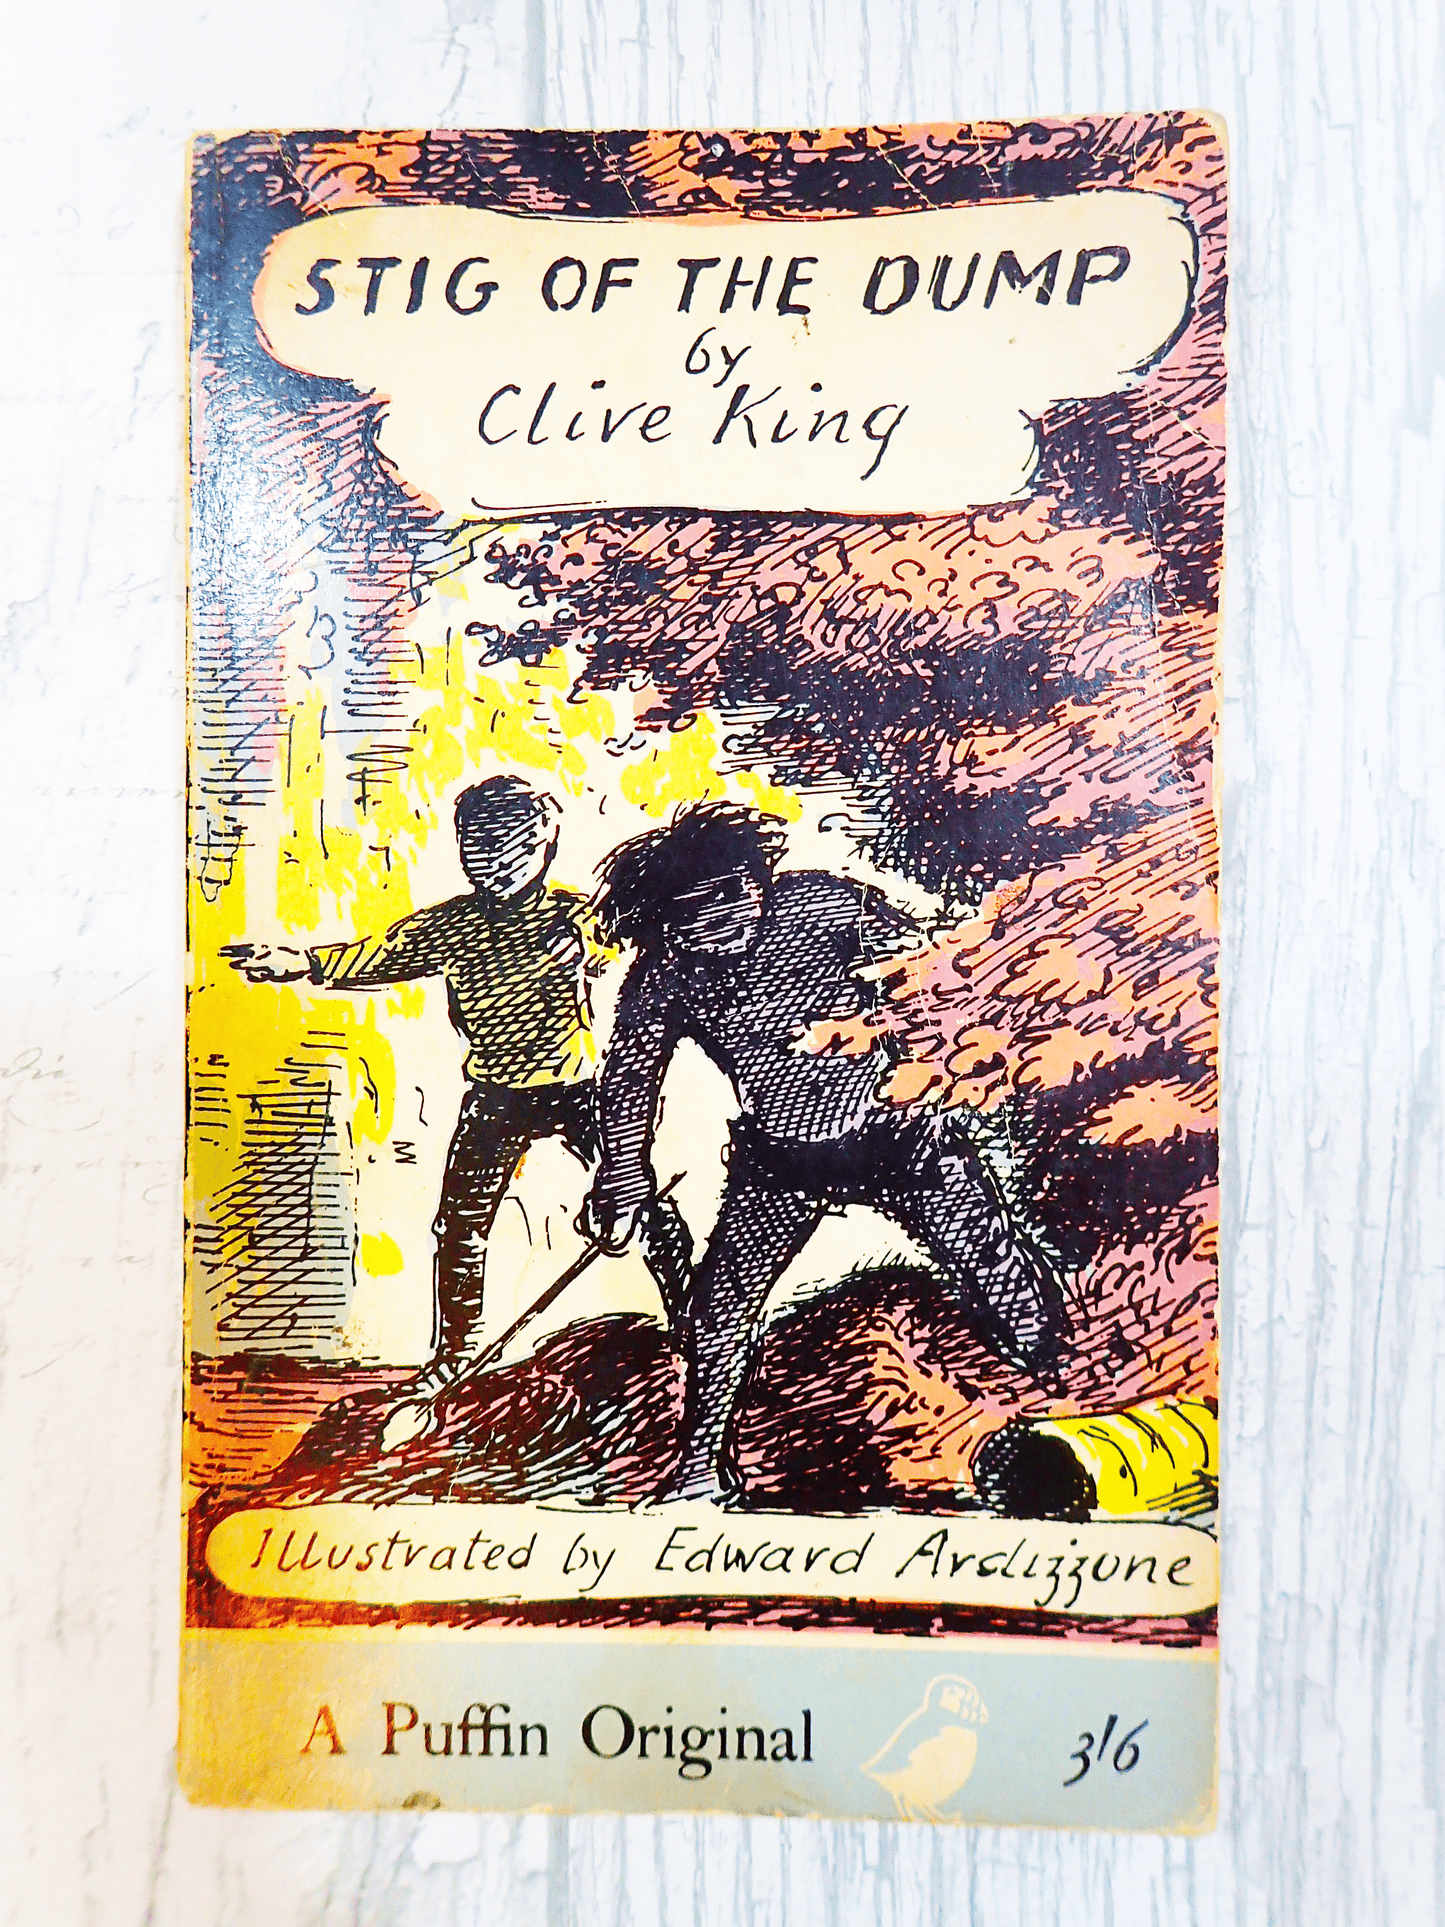 Front cover of Vintage children's classic paperback book Stig of the Dump by Clive King showing Stig and his friend Barney in the rubbish dump against a light background. 